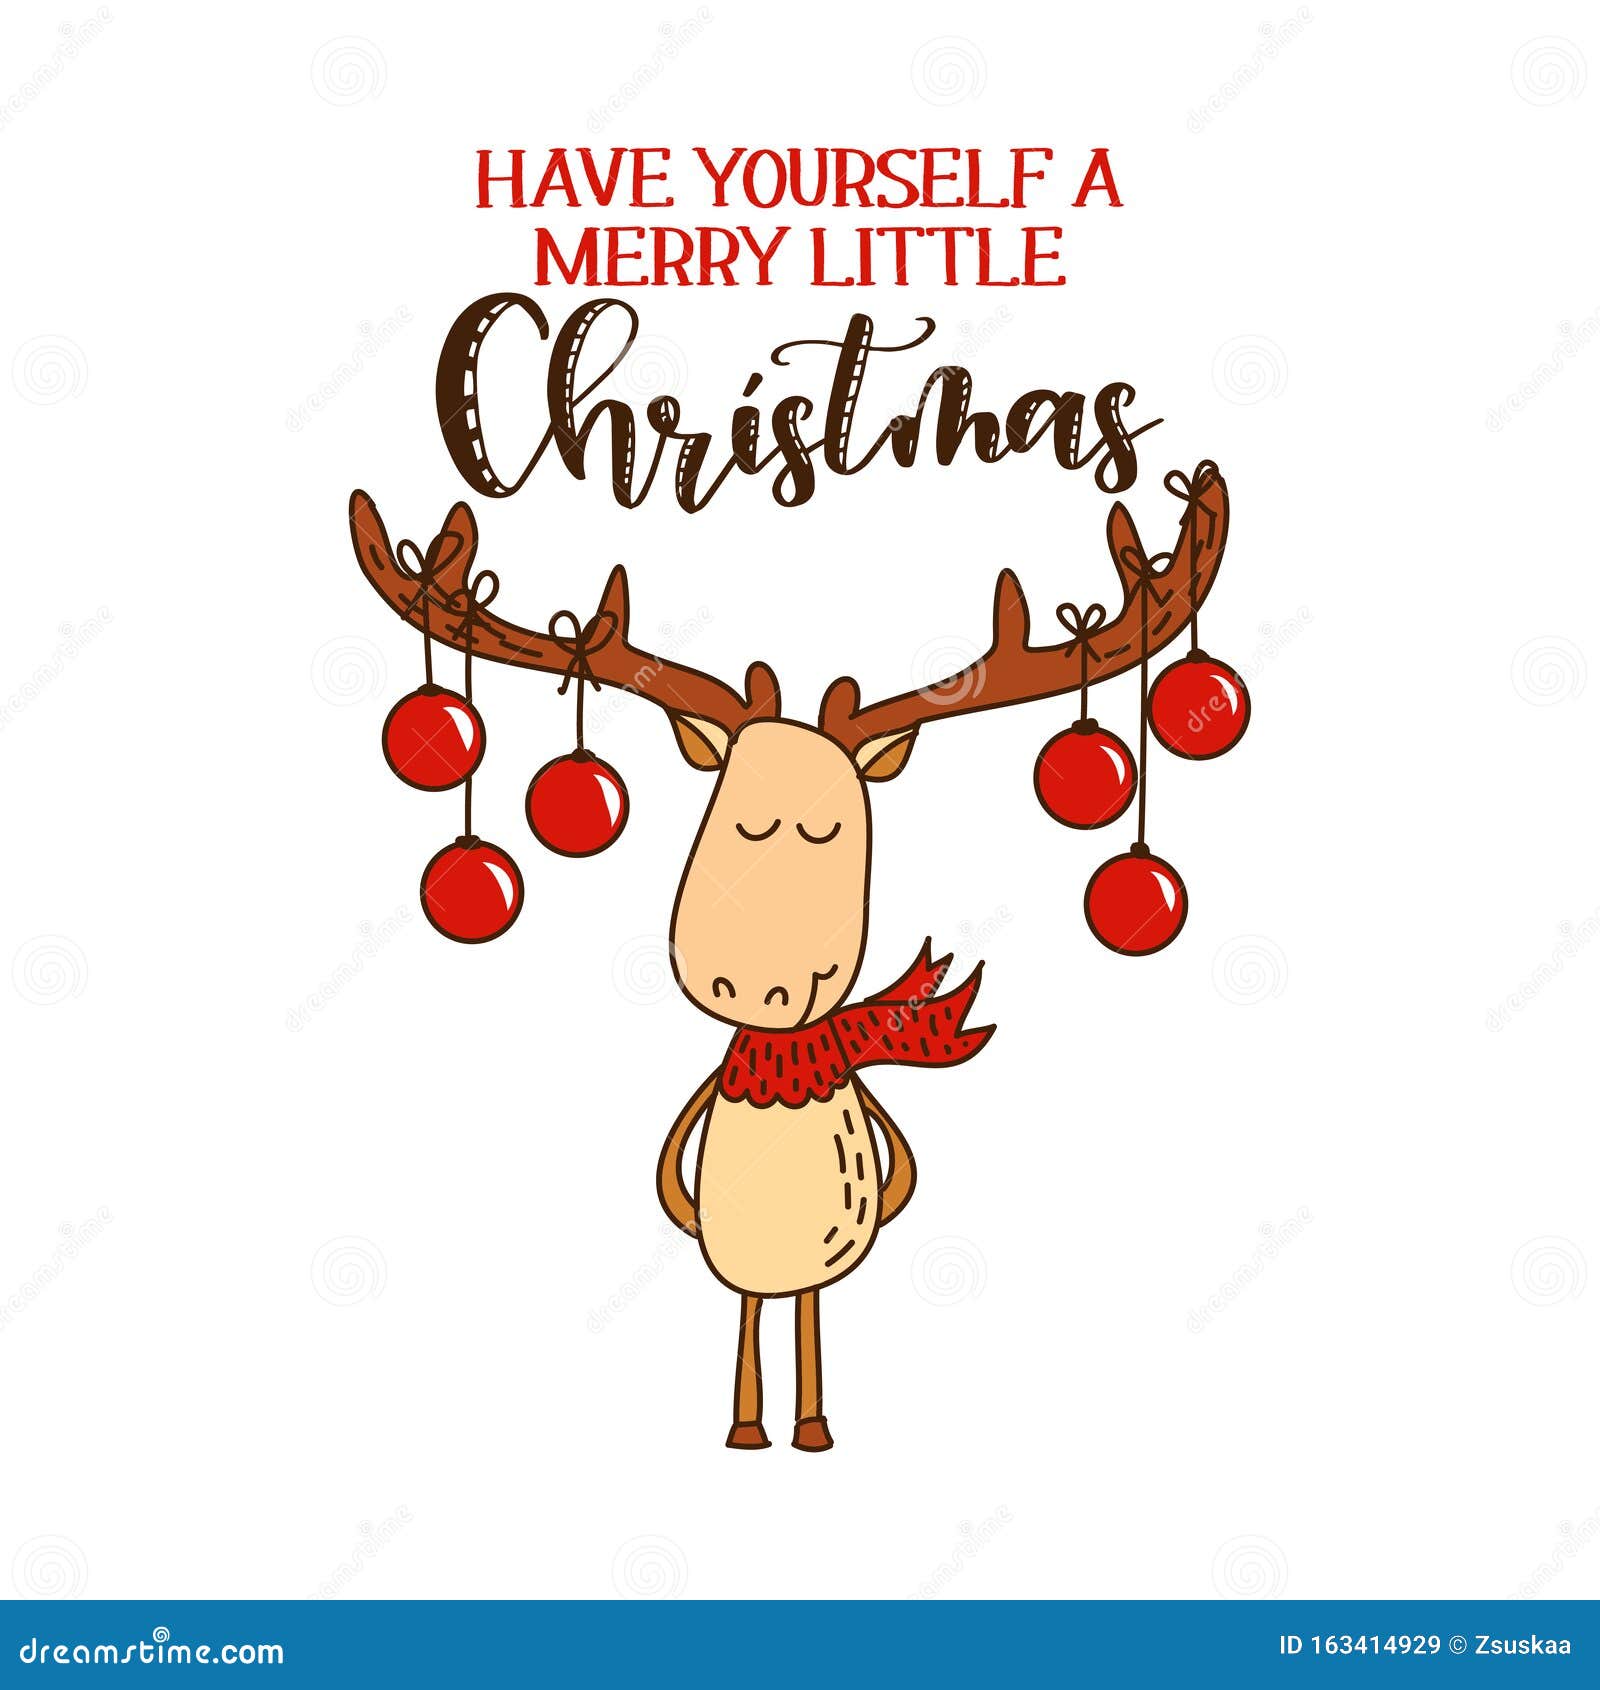 have yourself a merry little christmas - cute deer